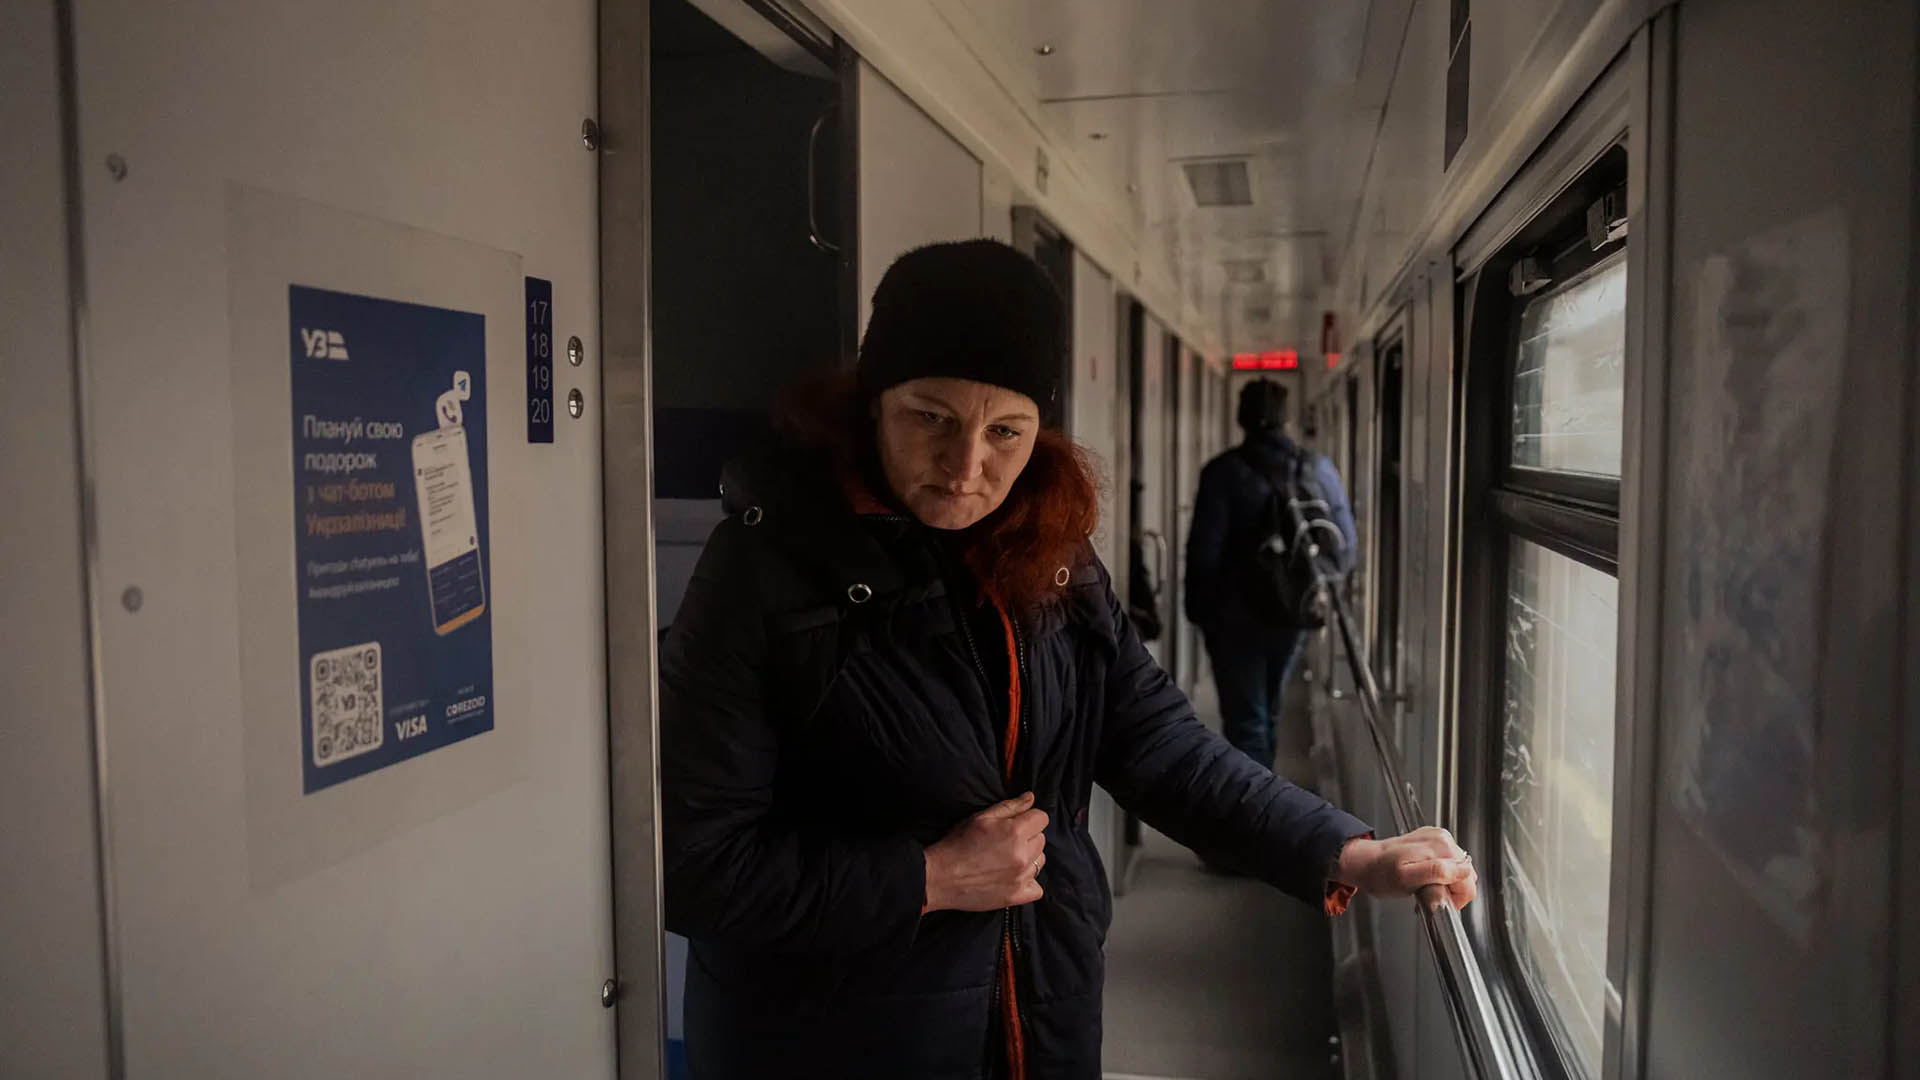 Natalya Zhornyk leaves her cabin at a train station in Kharkiv, Ukraine, ahead of the trip to retrieve her son, Artem, on March 12, 2023. (Daniel Berehulak/The New York Times)